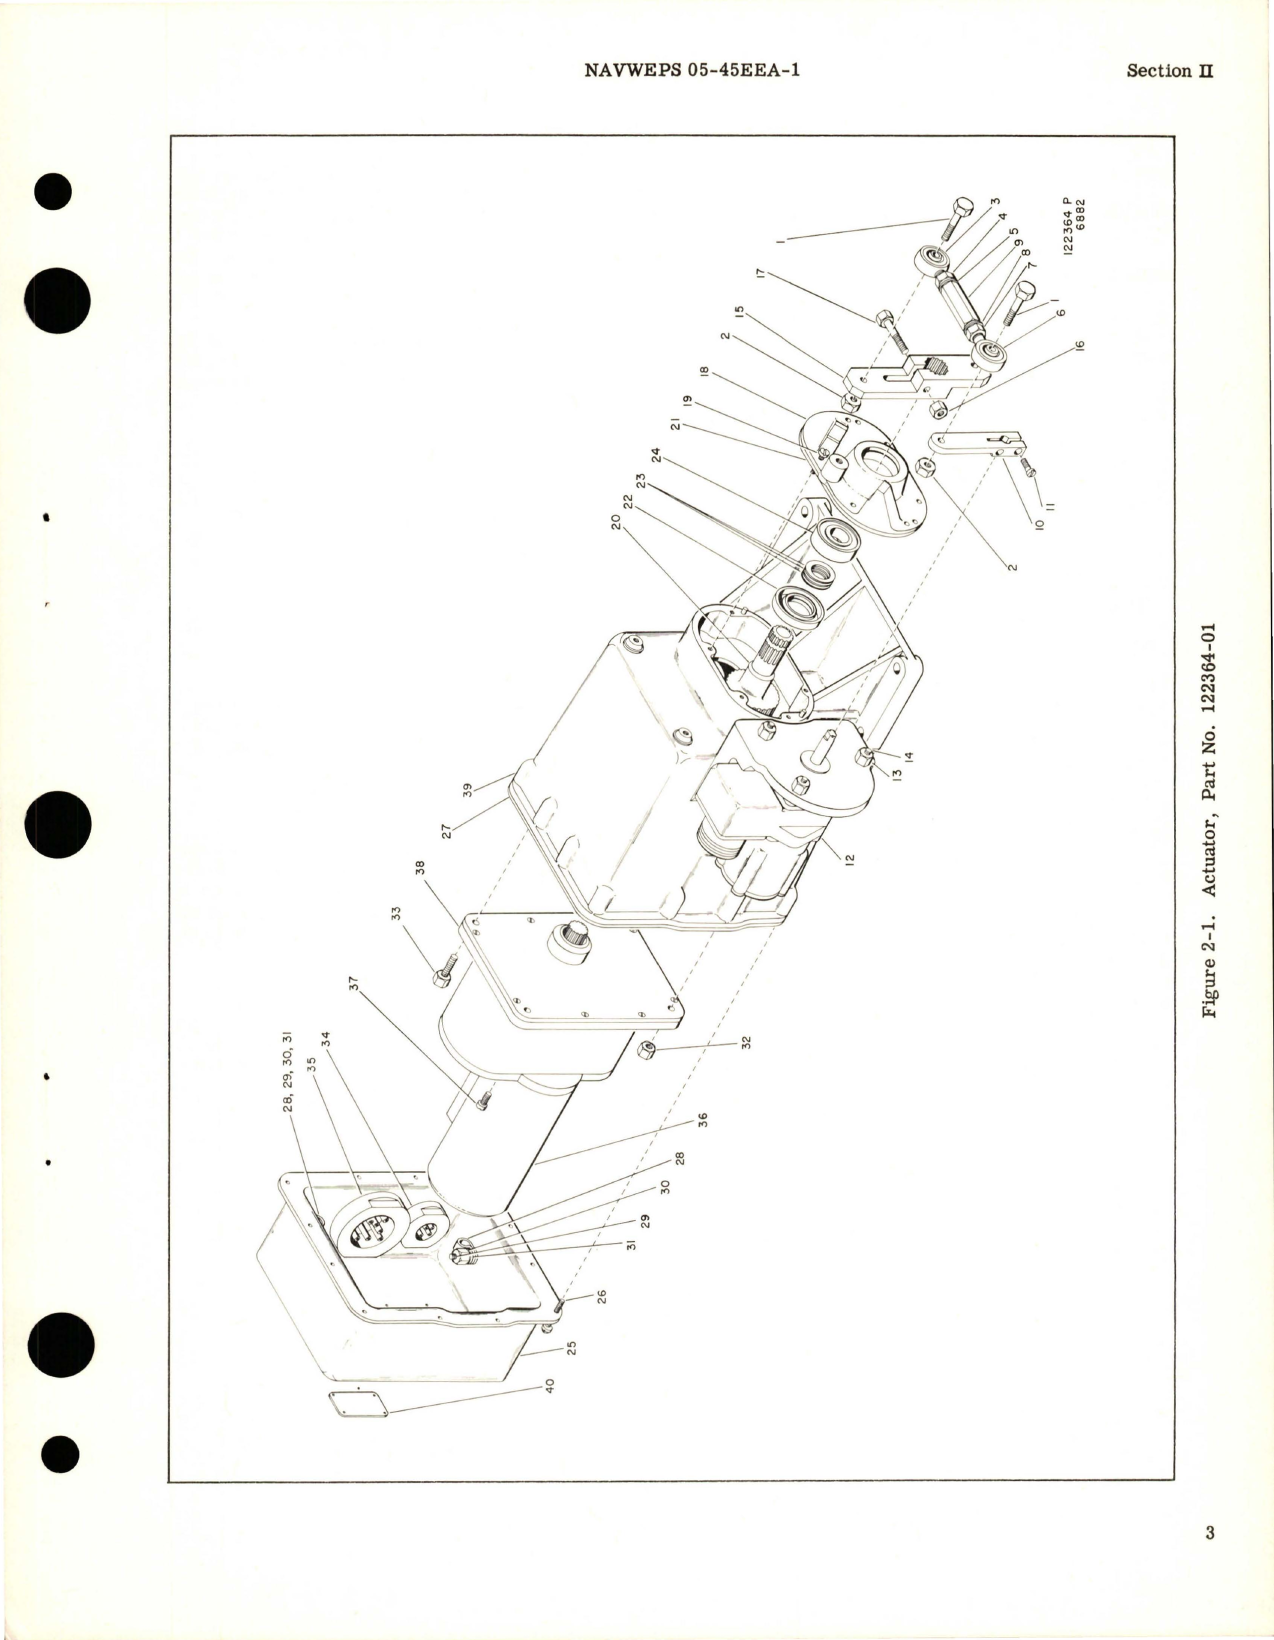 Sample page 7 from AirCorps Library document: Overhaul Instructions for Servo Actuator - Part 122364-01